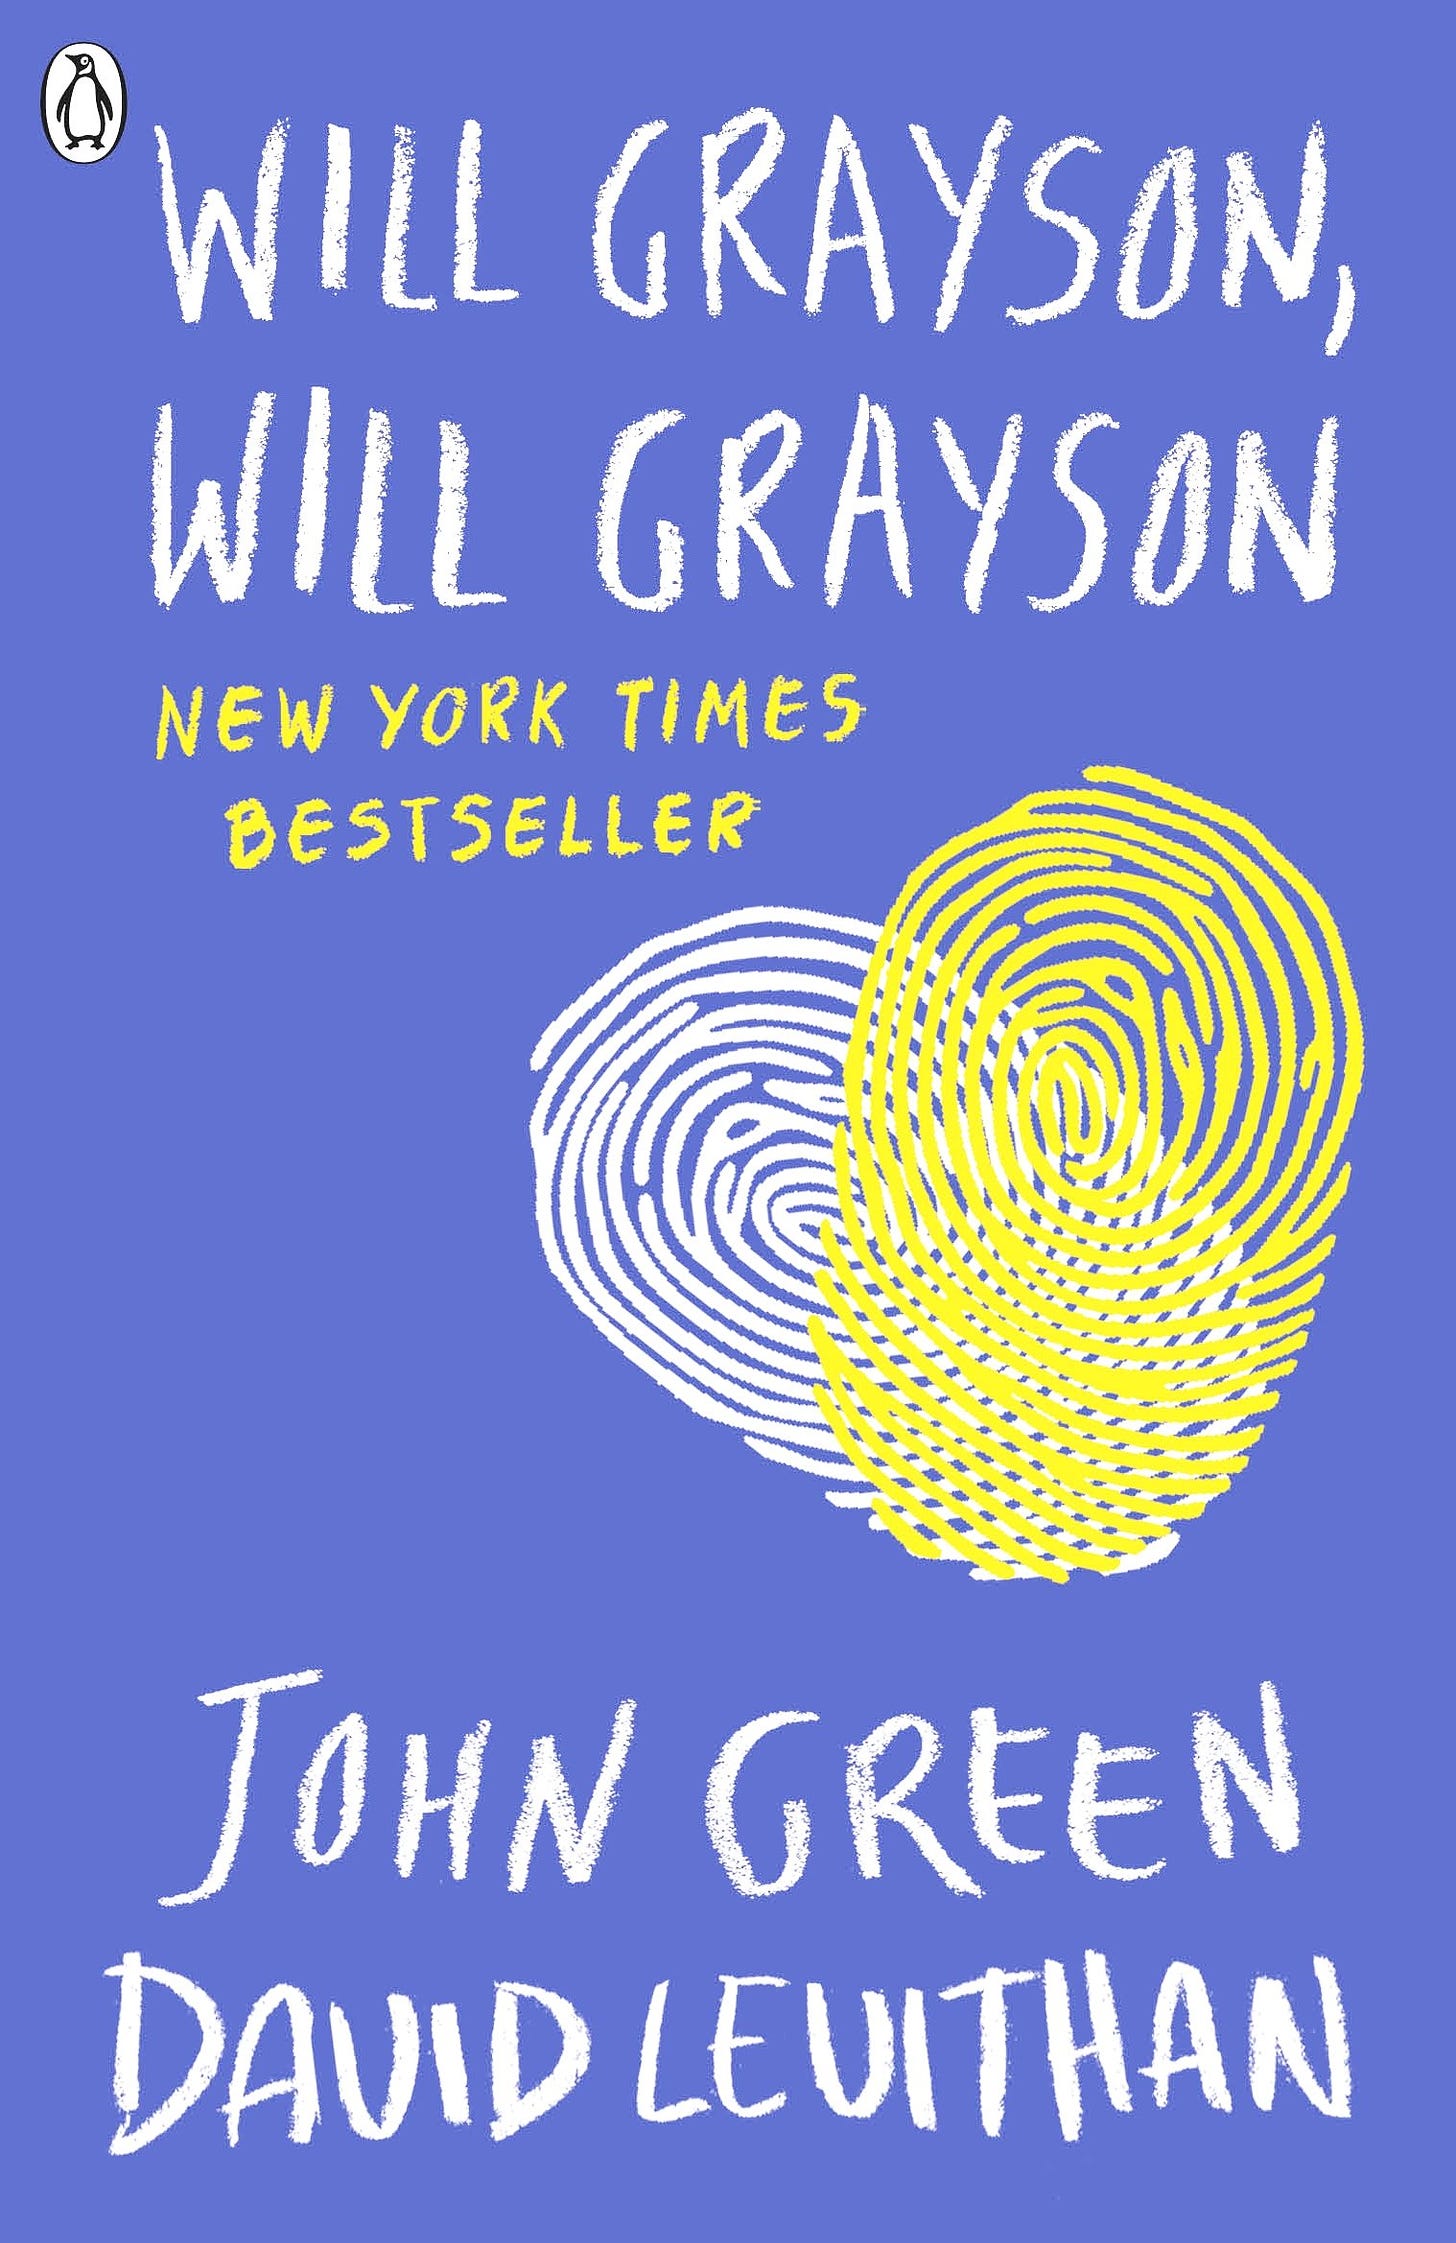 Buy Will Grayson, Will Grayson Book Online at Low Prices in India | Will  Grayson, Will Grayson Reviews & Ratings - Amazon.in